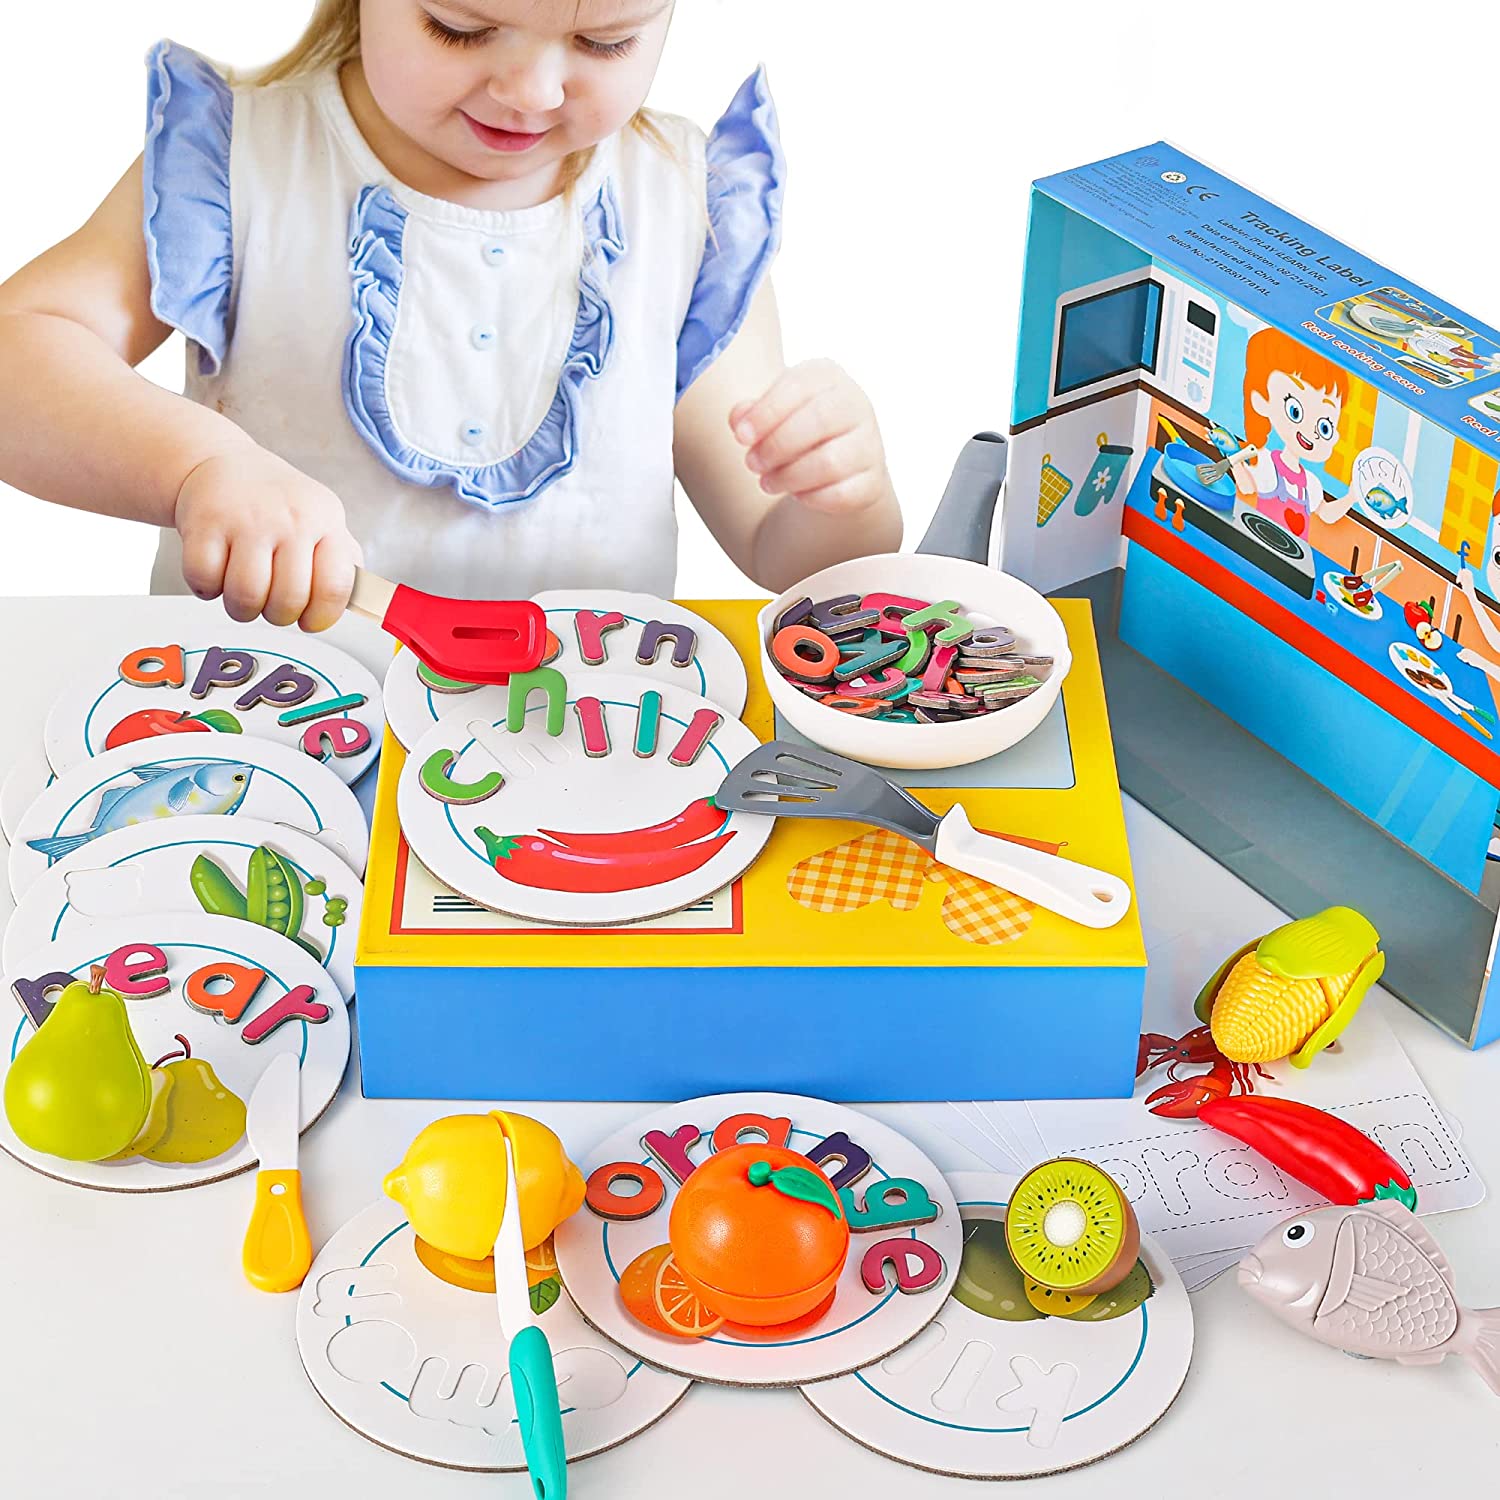 Kids Pretend Play Kichen Food Playset, Toddler Match Letters Learning Toy W/ Alphabet Flash Card, Cooking & Cutting Toy, Preschool Educational Birthday Gift for 3 4 5 6 Year Old Boy Girl